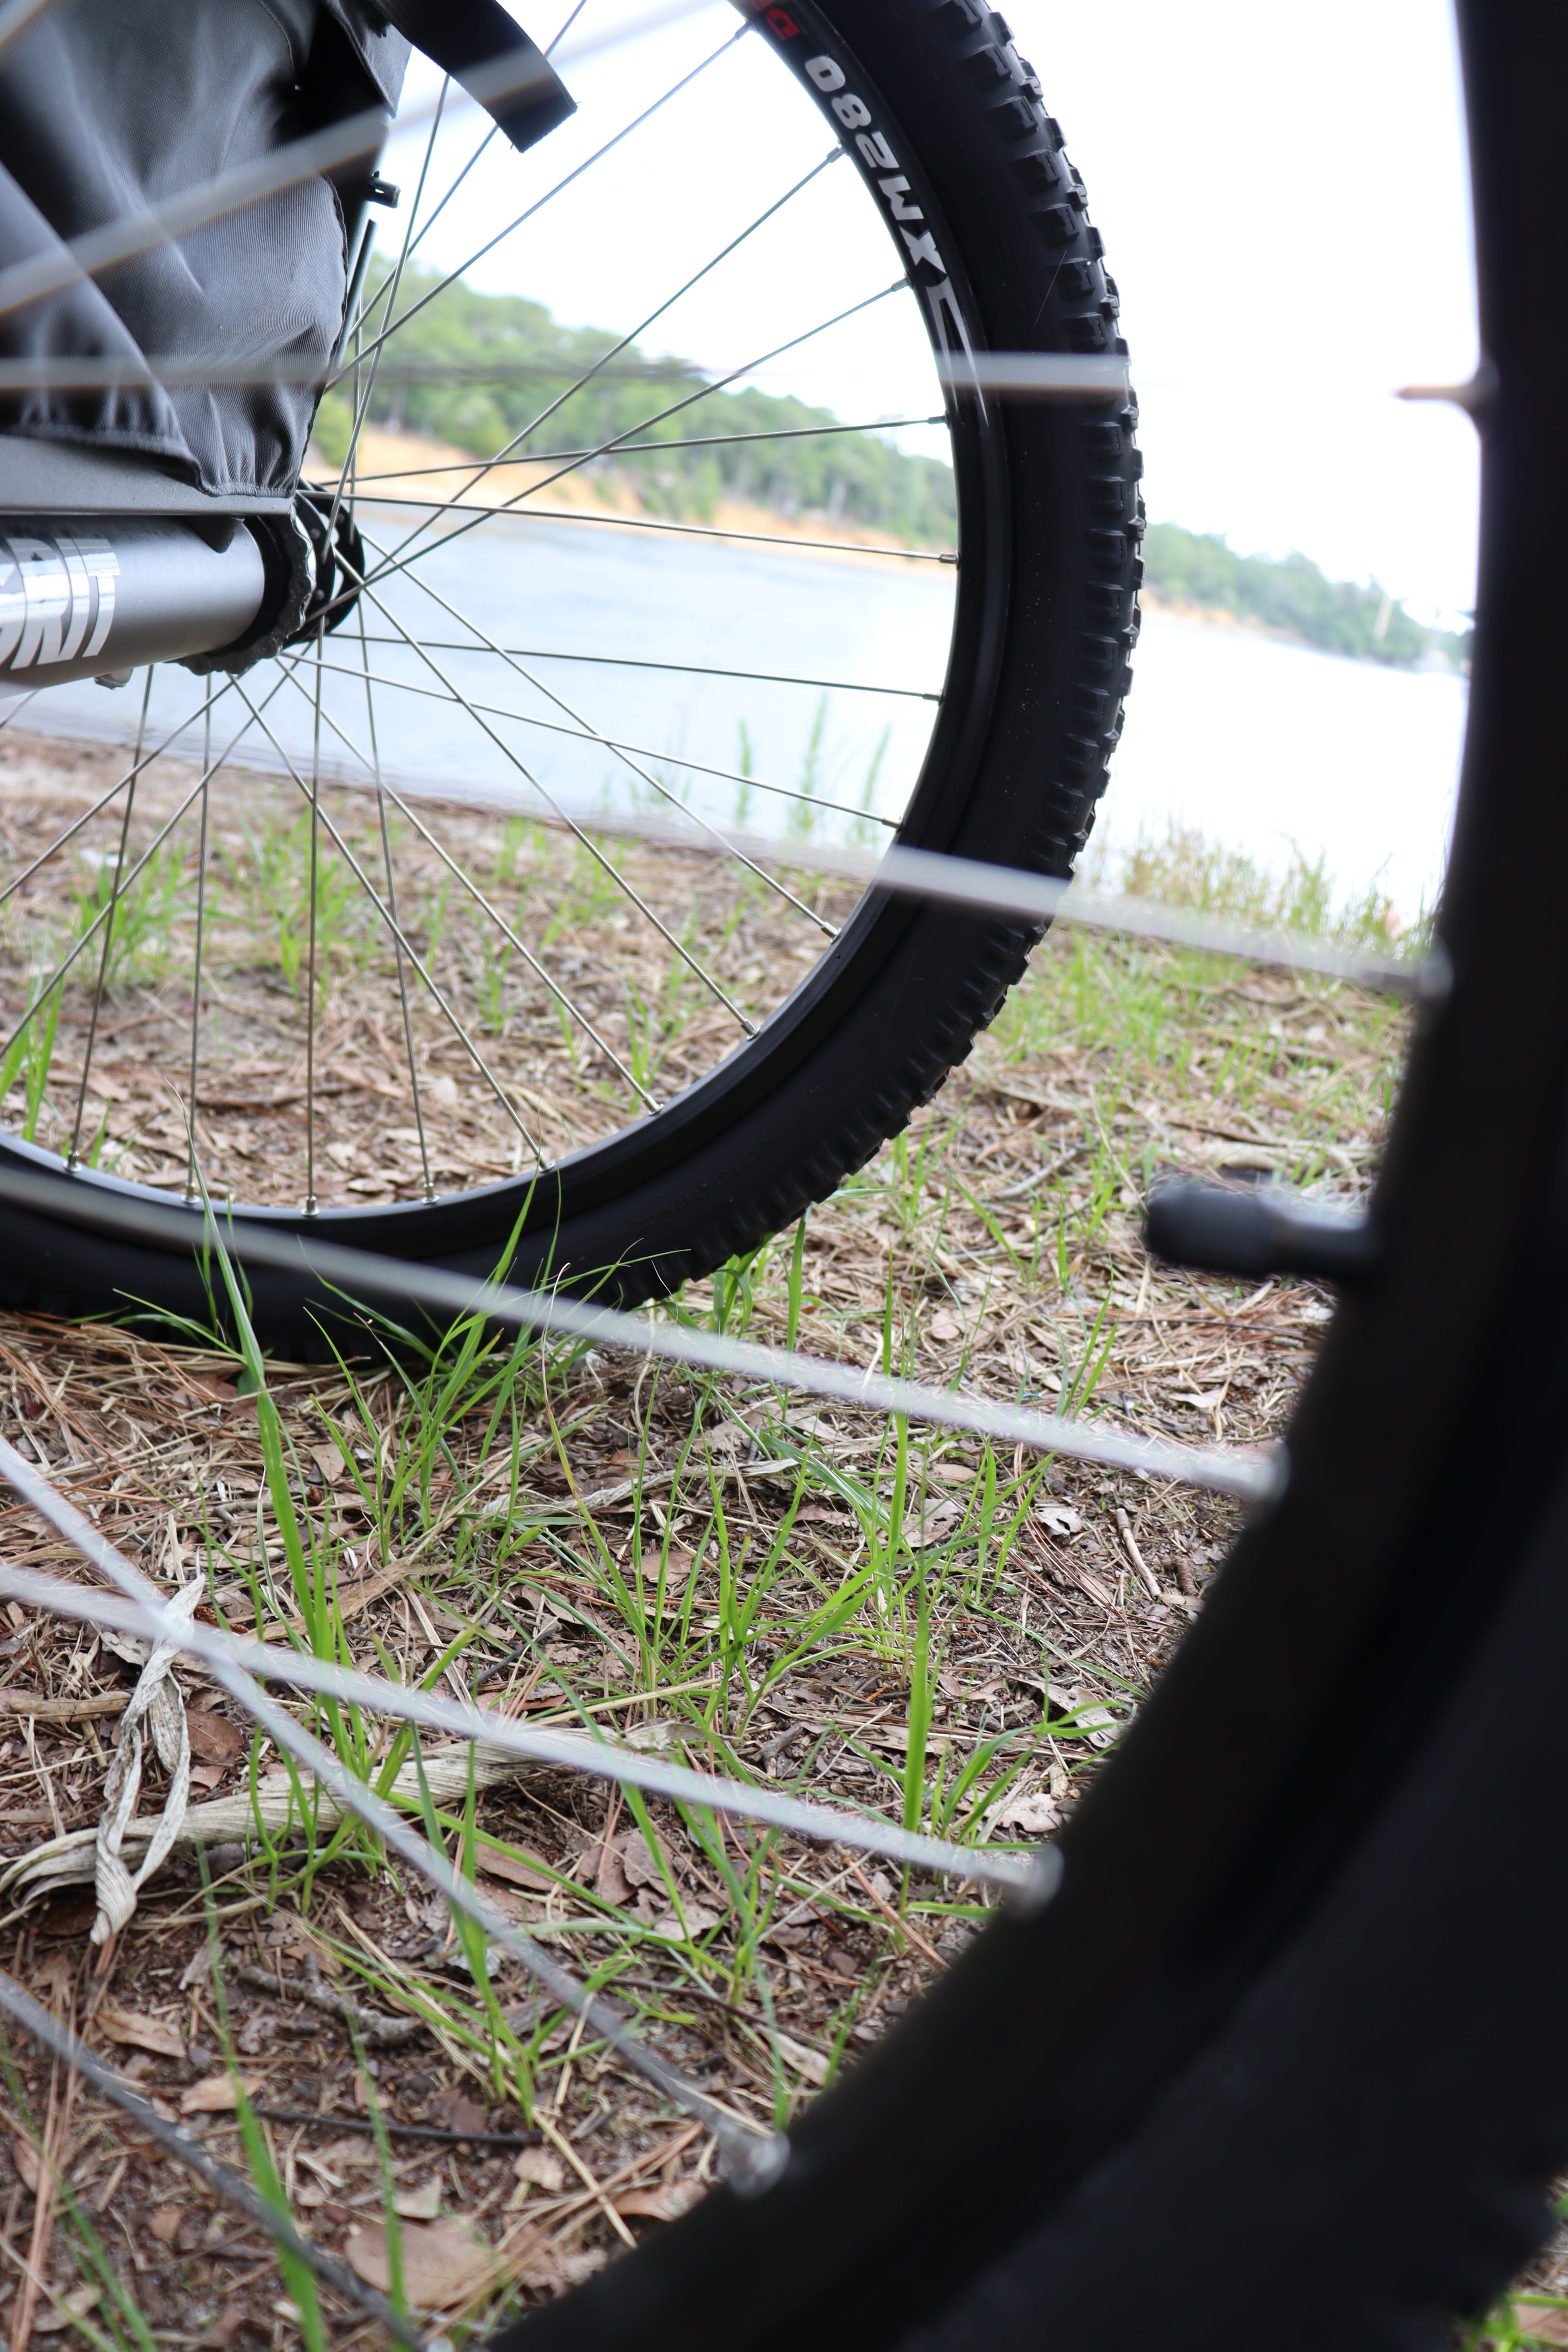 Image of a close-up of wheelchair wheels, with grass underneath and, in the background, trees and a river or pond